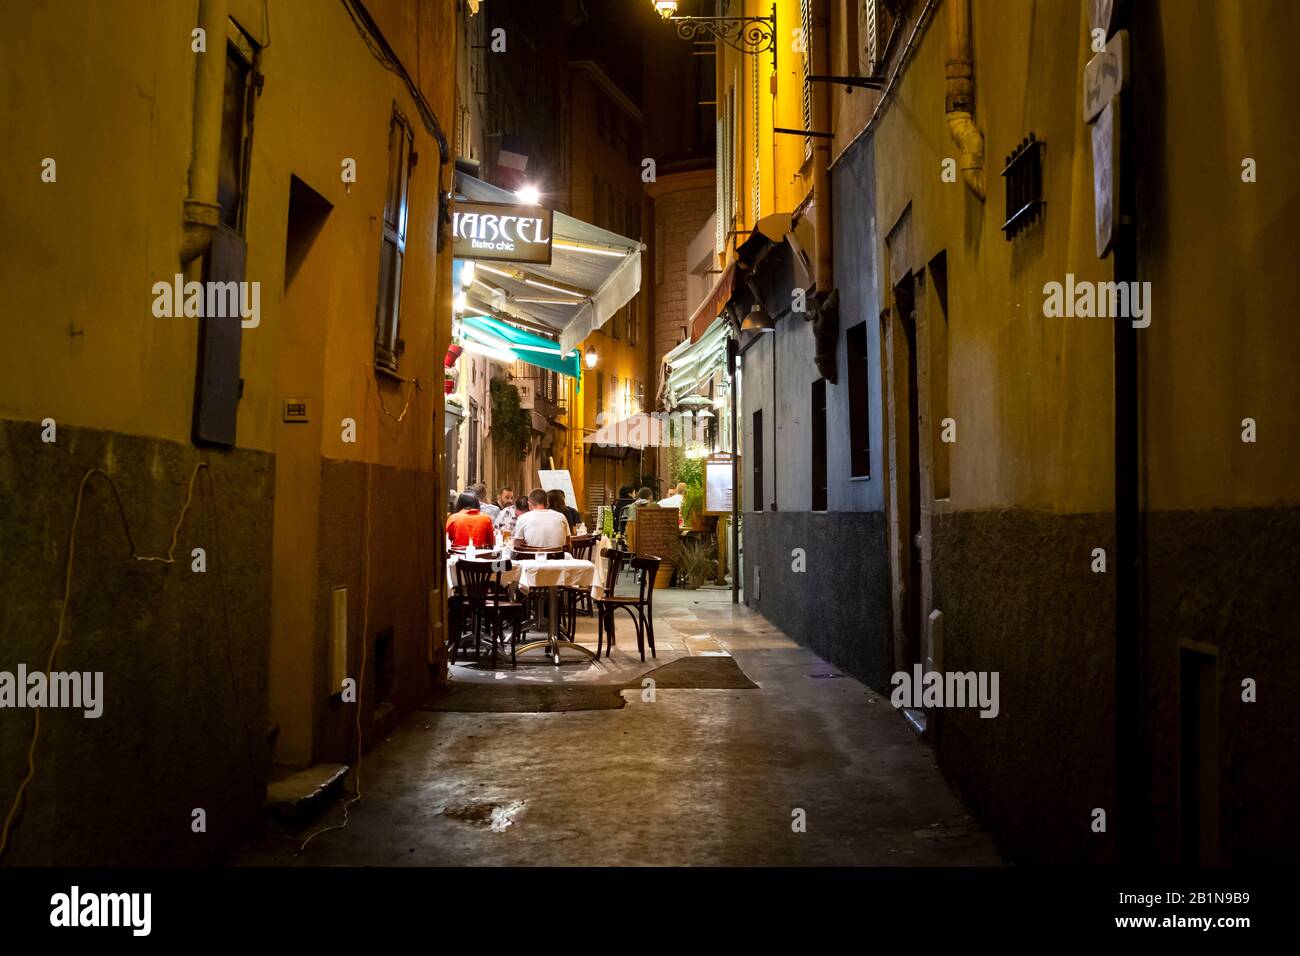 Tourists enjoy a late dinner at a cafe in a narrow alley in the Vieux Nice Old Town of Nice, France, on the French Riviera. Stock Photo